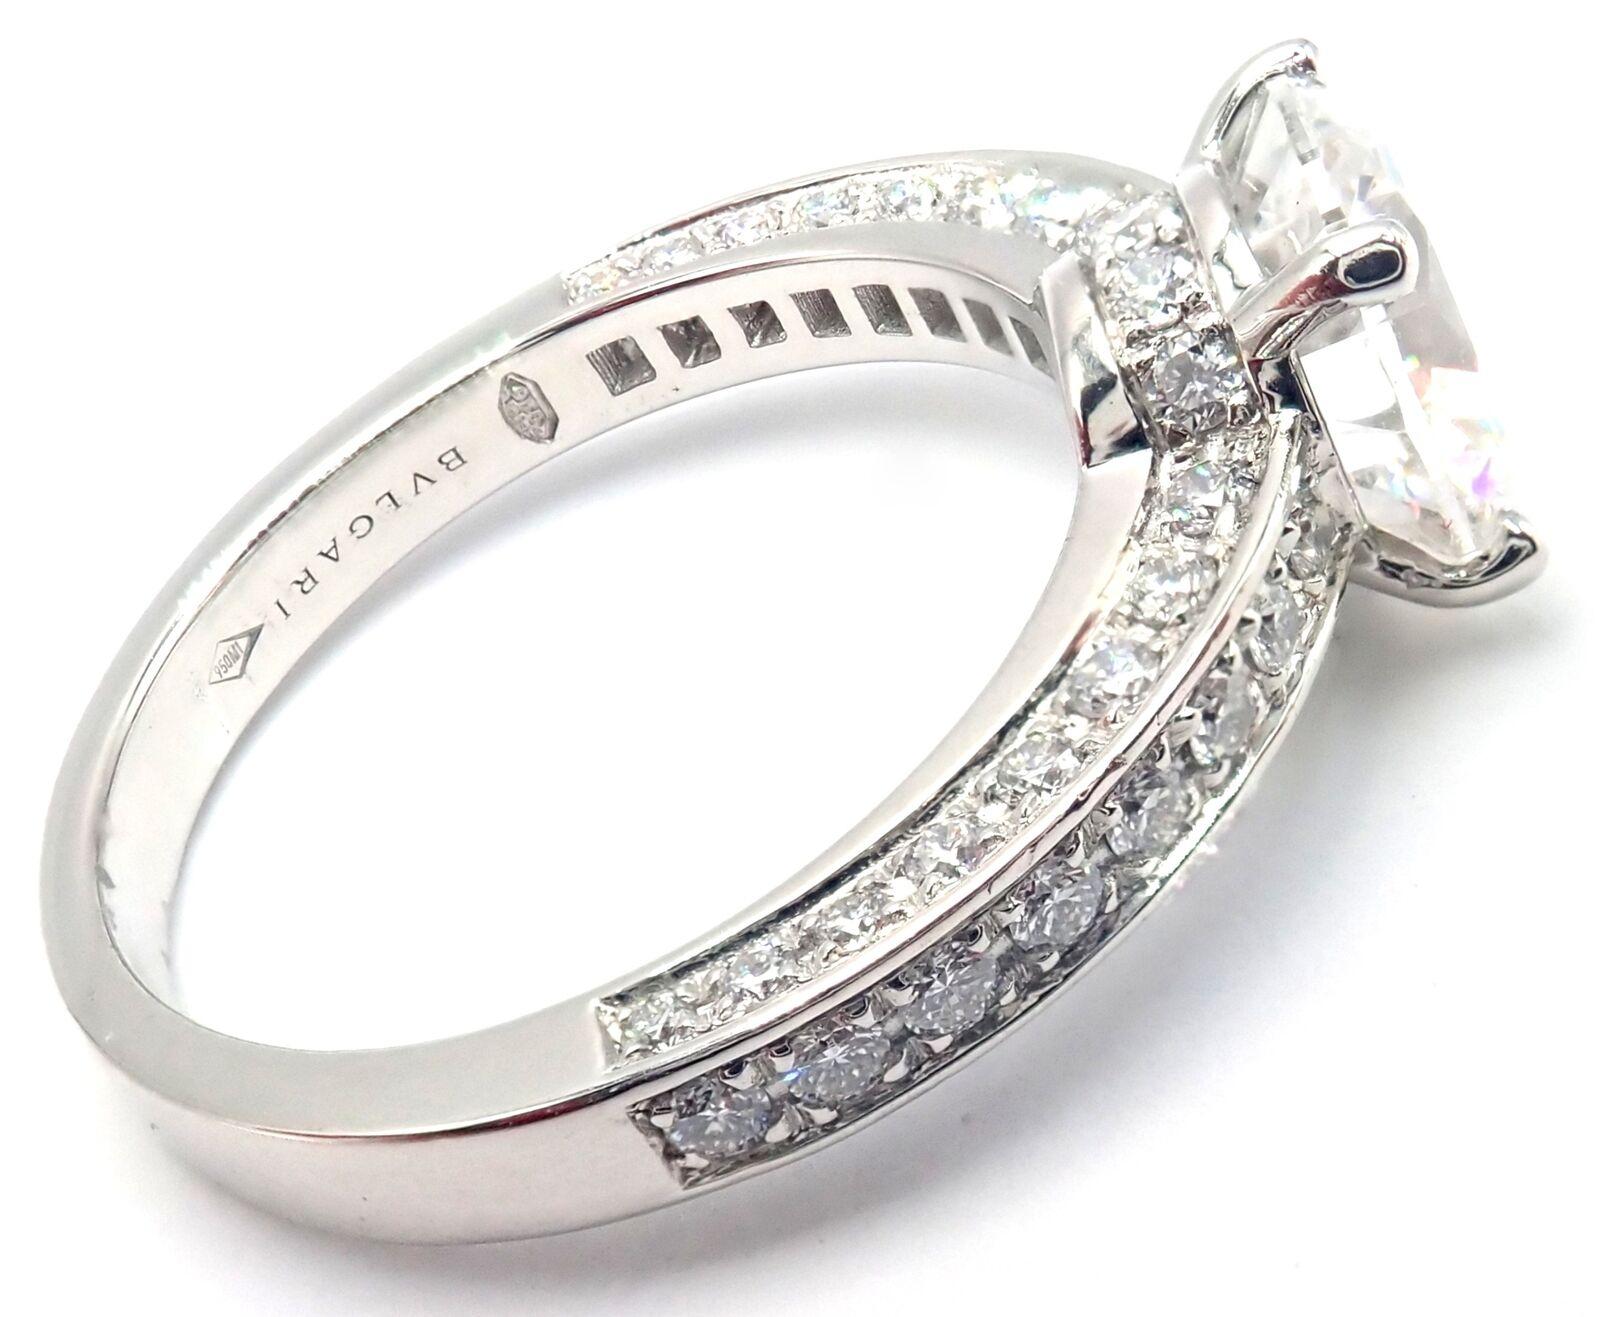 Platinum Diamond Solitaire Engagement Ring by Bulgari. 
With 1 Round brilliant cut diamond total weight approximately 2.08ct F/VS1
Round brilliant cut diamonds VS1/E color total weight approximately 1.96ct
This ring comes with GIA certificate number